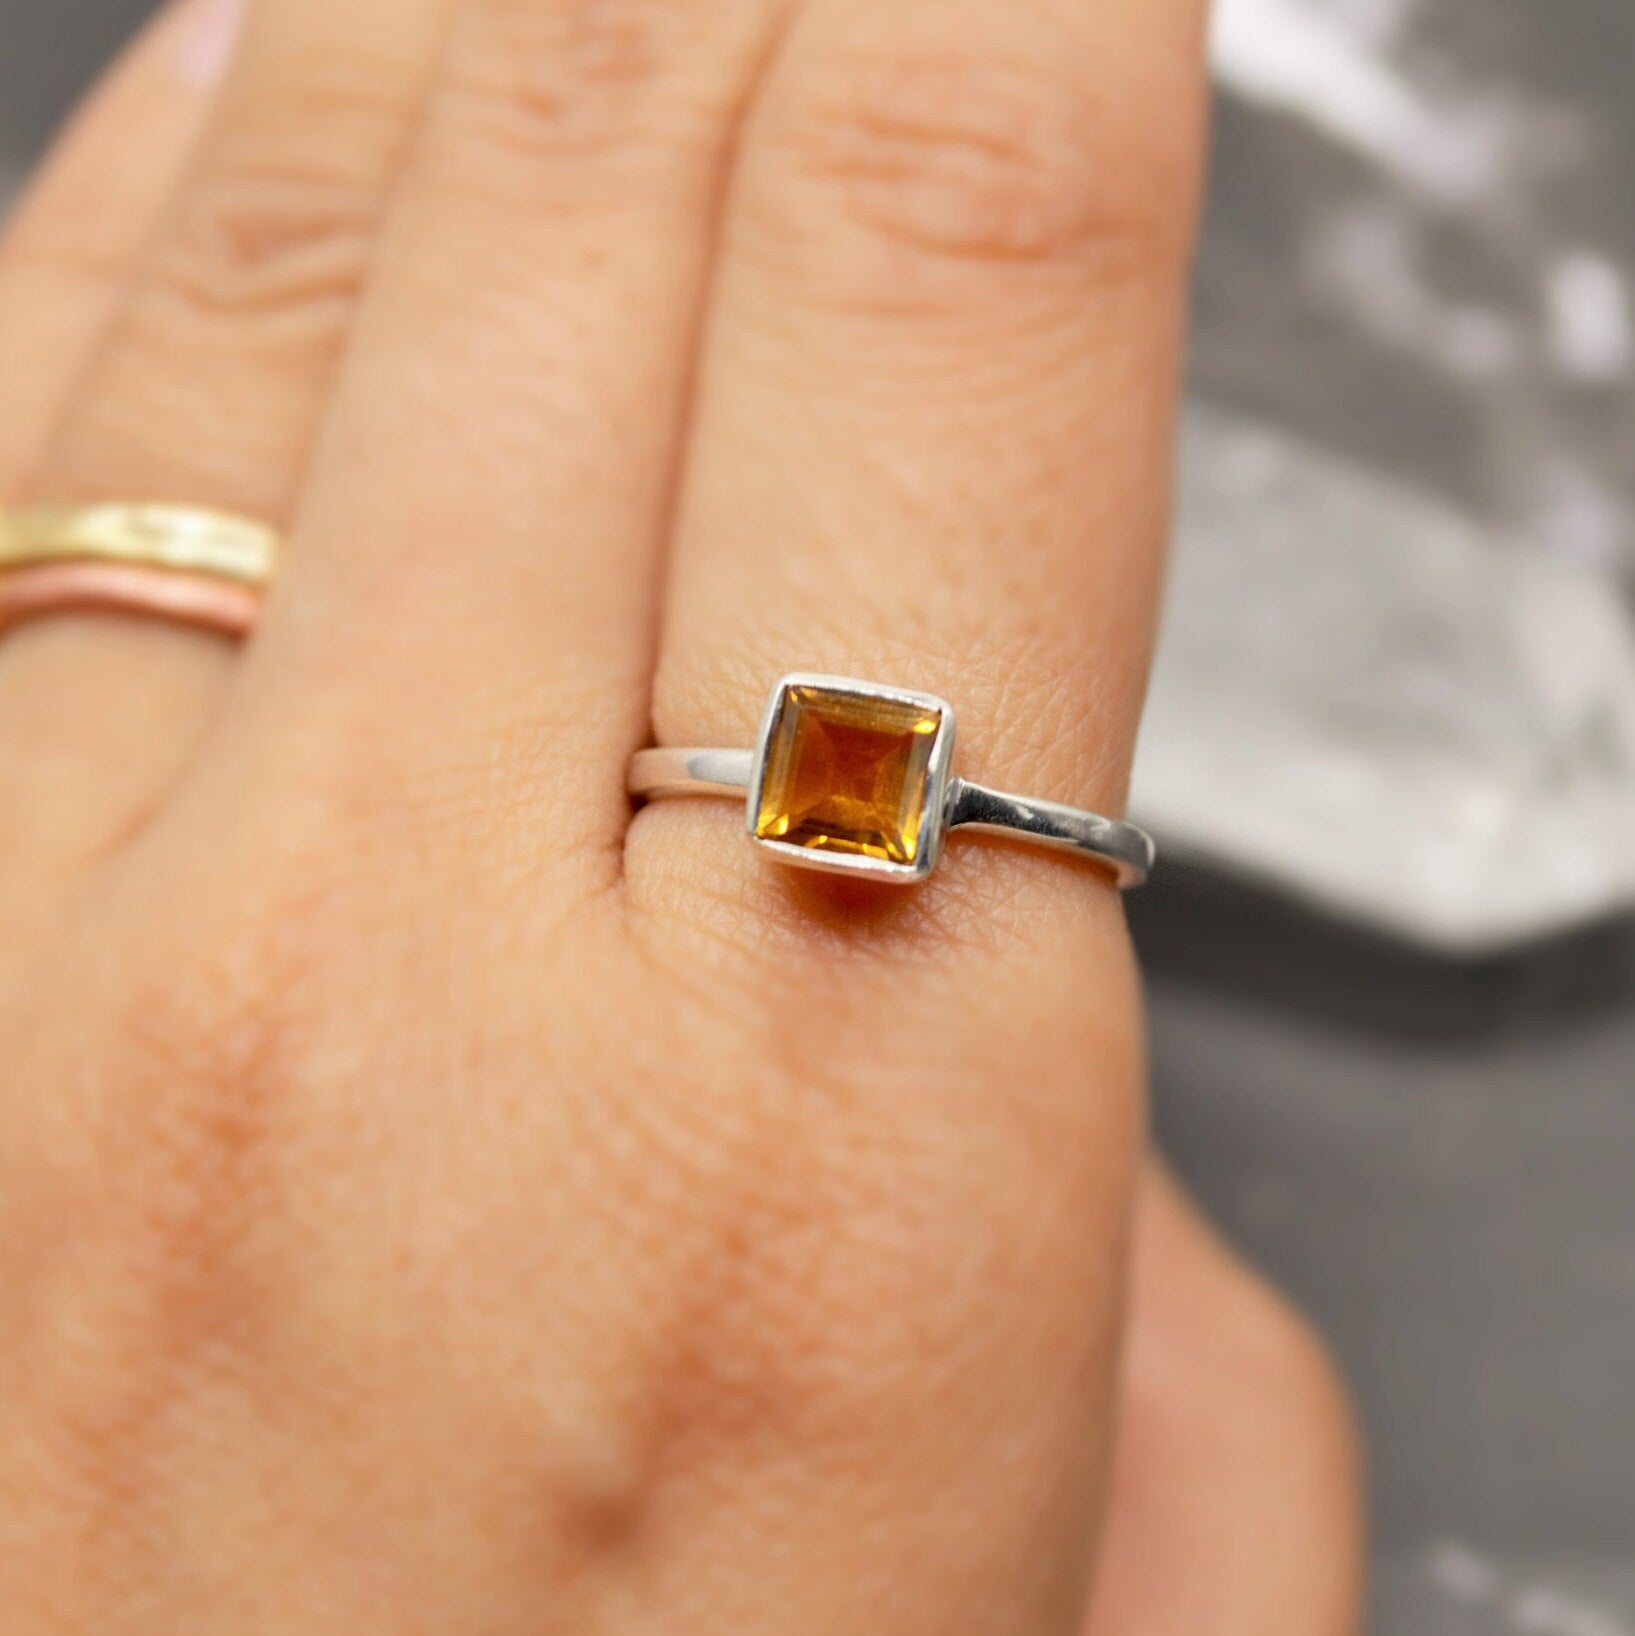 Sterling Silver Citrine Ring, UK Size M,N, Yellow Stone Ring, Citrine Jewelry, November Birthstone, Gift For Her, Unique Yellow Citrine Ring